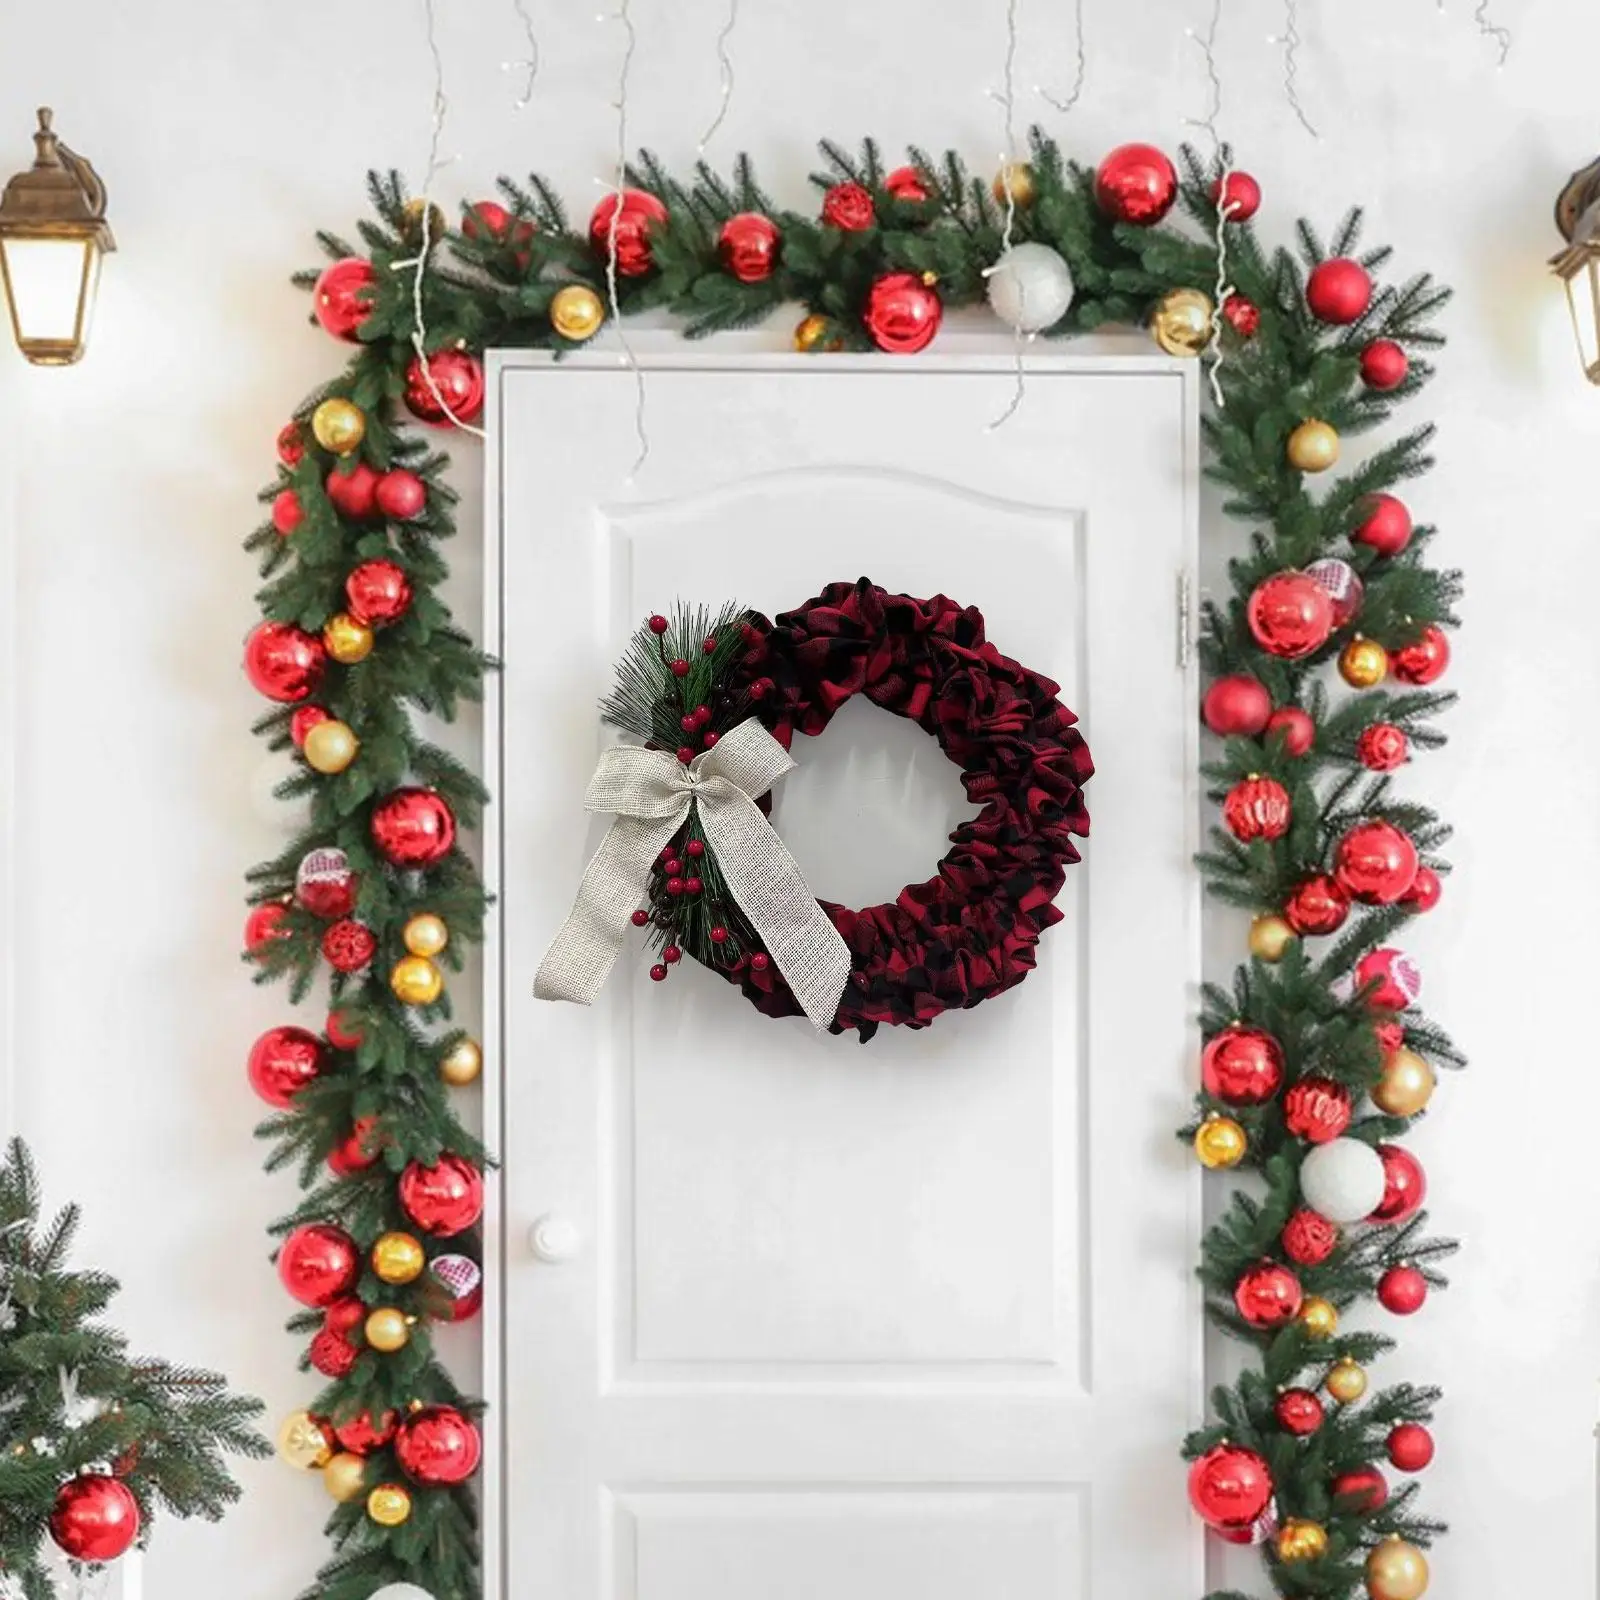 Christmas Round Wreath Front Door Wreath Rustic Wall Decor Artificial Wreath Flower Wreaths for Festival Outside Balcony Home